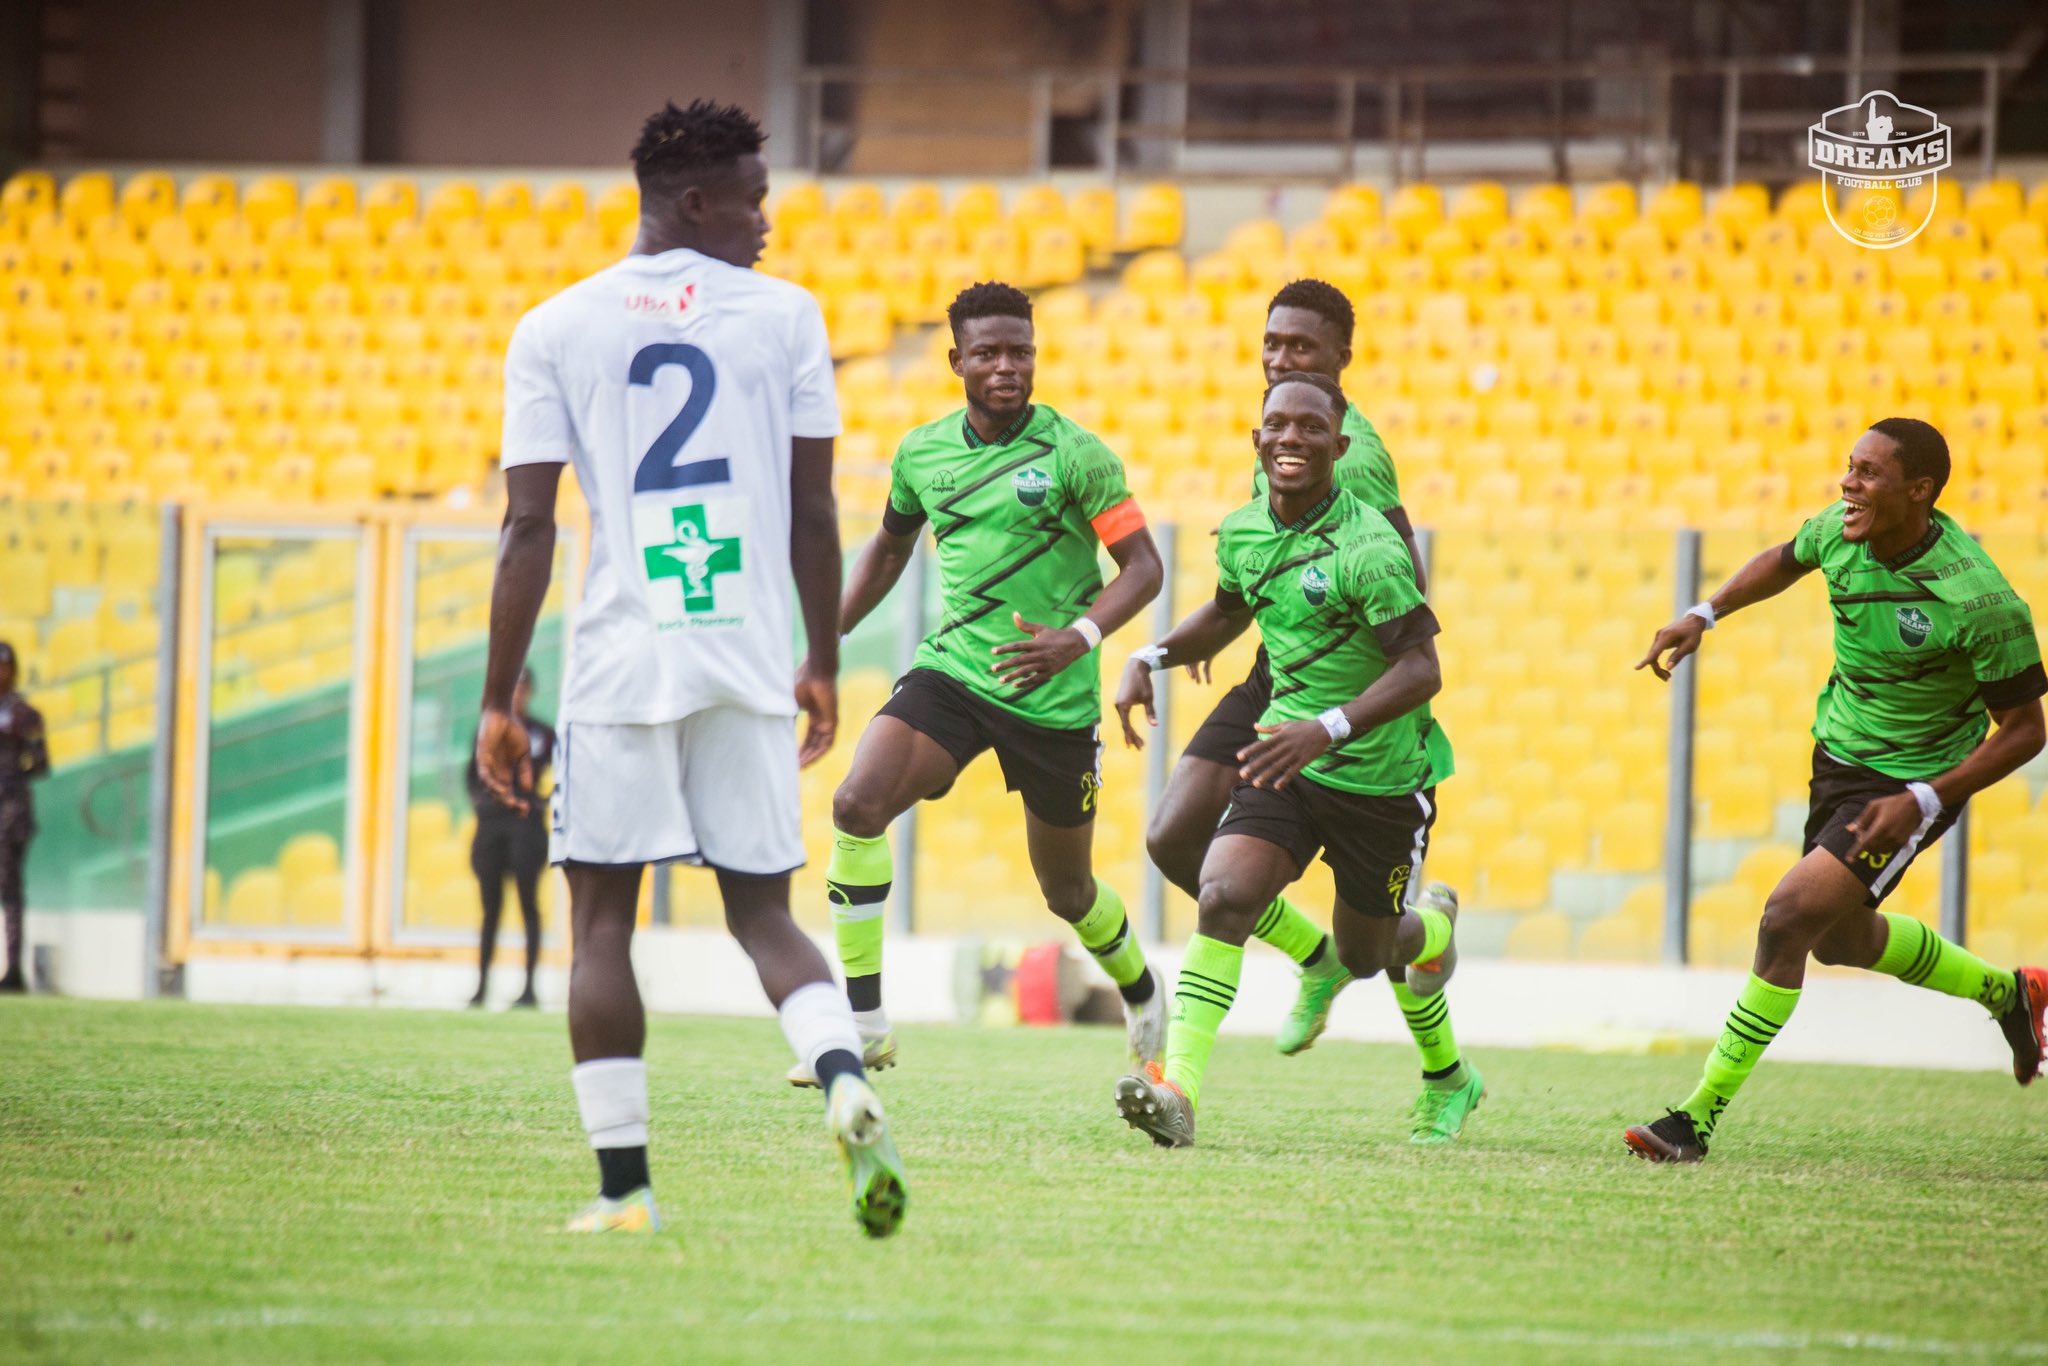 CAF Confederation Cup: Dreams FC paired with Rivers United, Club Africain and APC Lobito in Group C